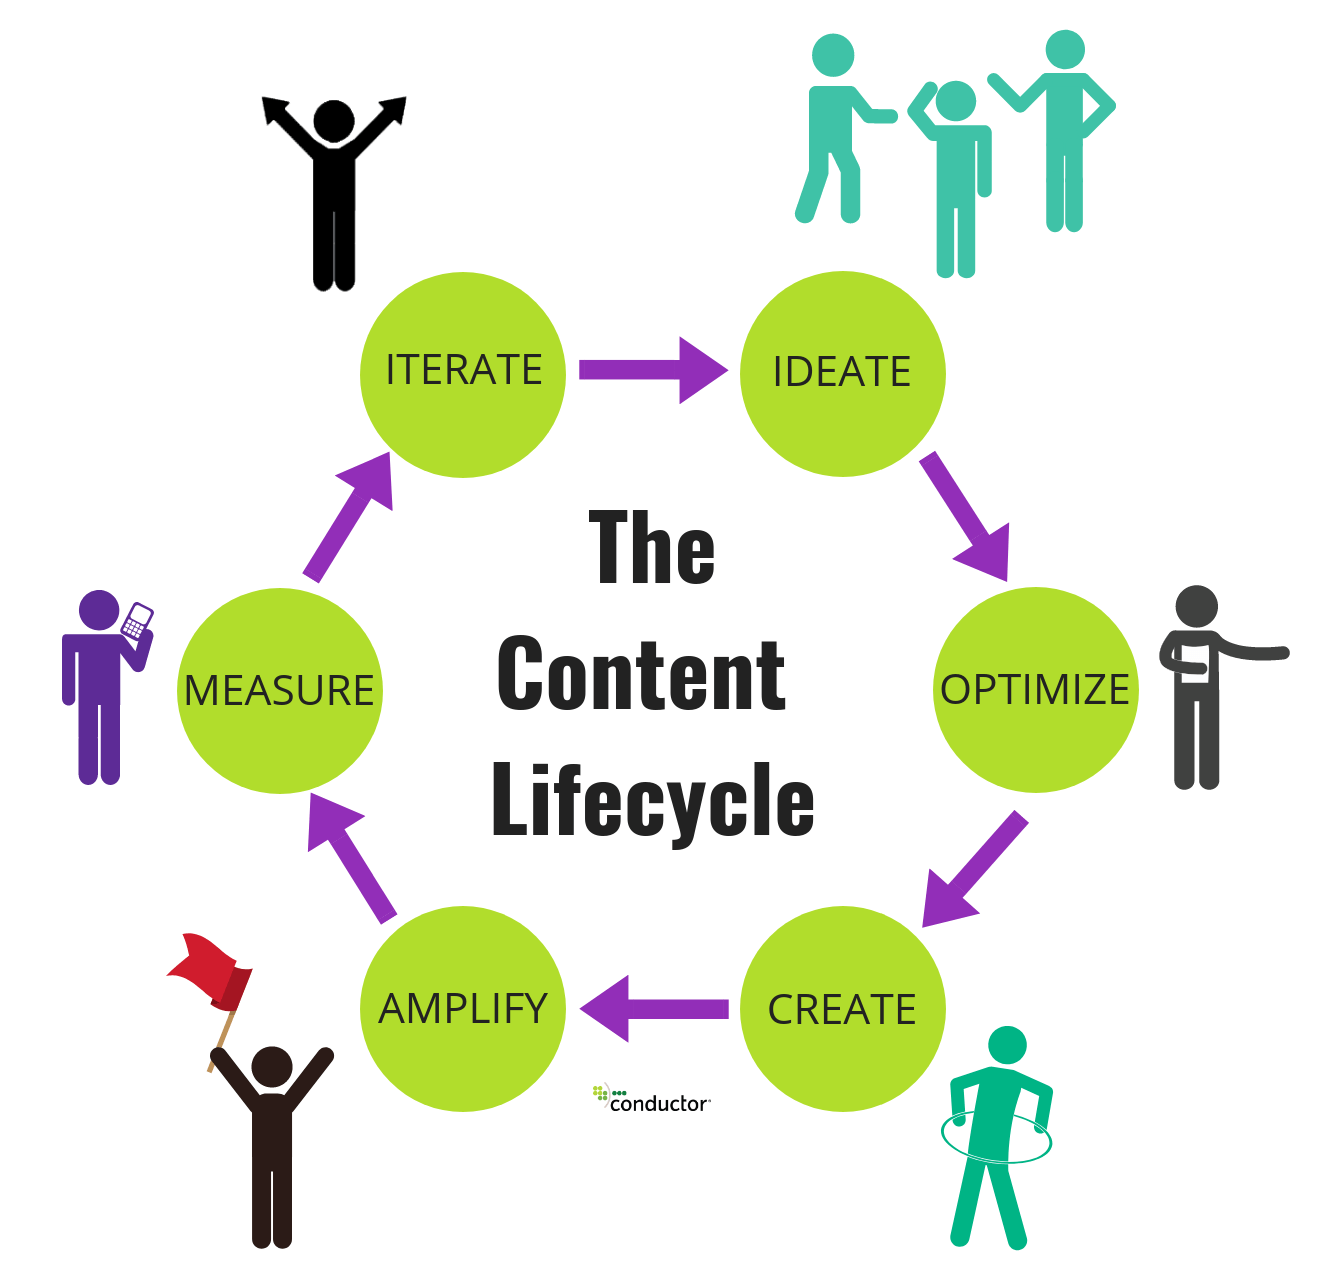 The content lifecycle and content production usually involve the entire marketing team.